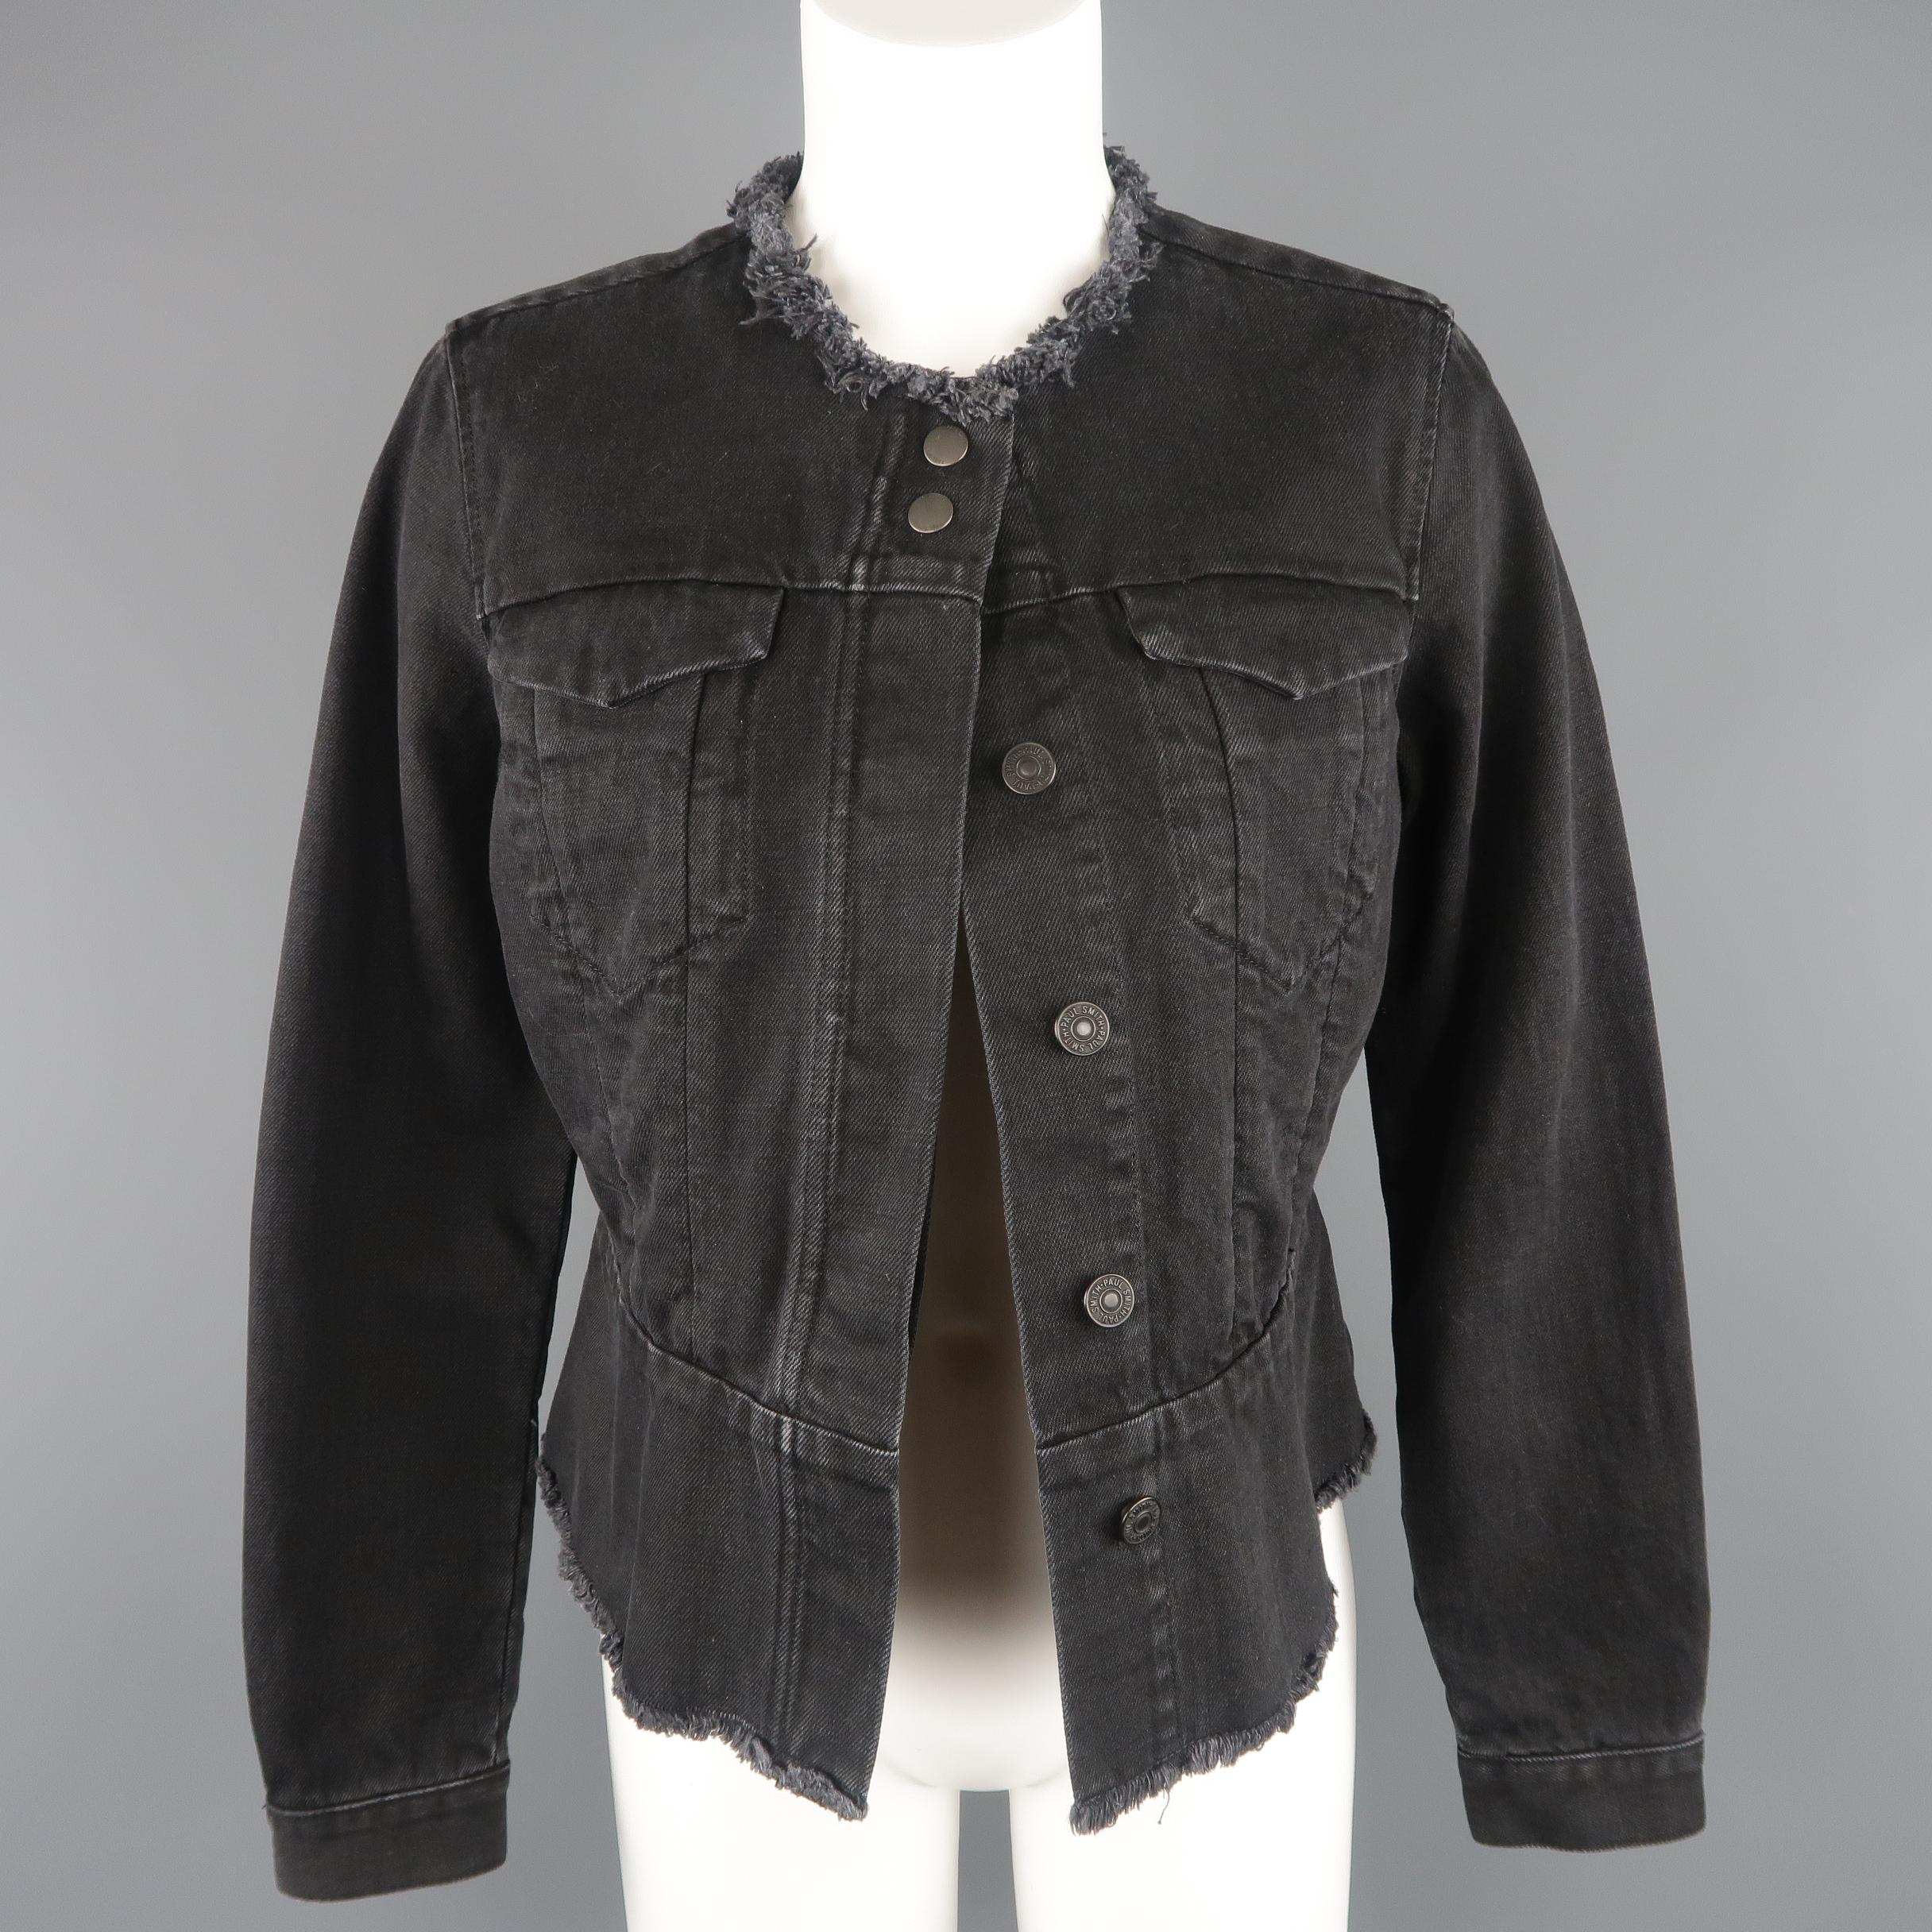 PAUL SMITH trucker jacket comes in washed black denim with a frayed hem, hidden placket front, breast pockets, and detachable shearling collar. Made in Italy.
 
Excellent Pre-Owned Condition.
Marked: S
 
Measurements:
 
Shoulder: 15 in.
Bust: 16